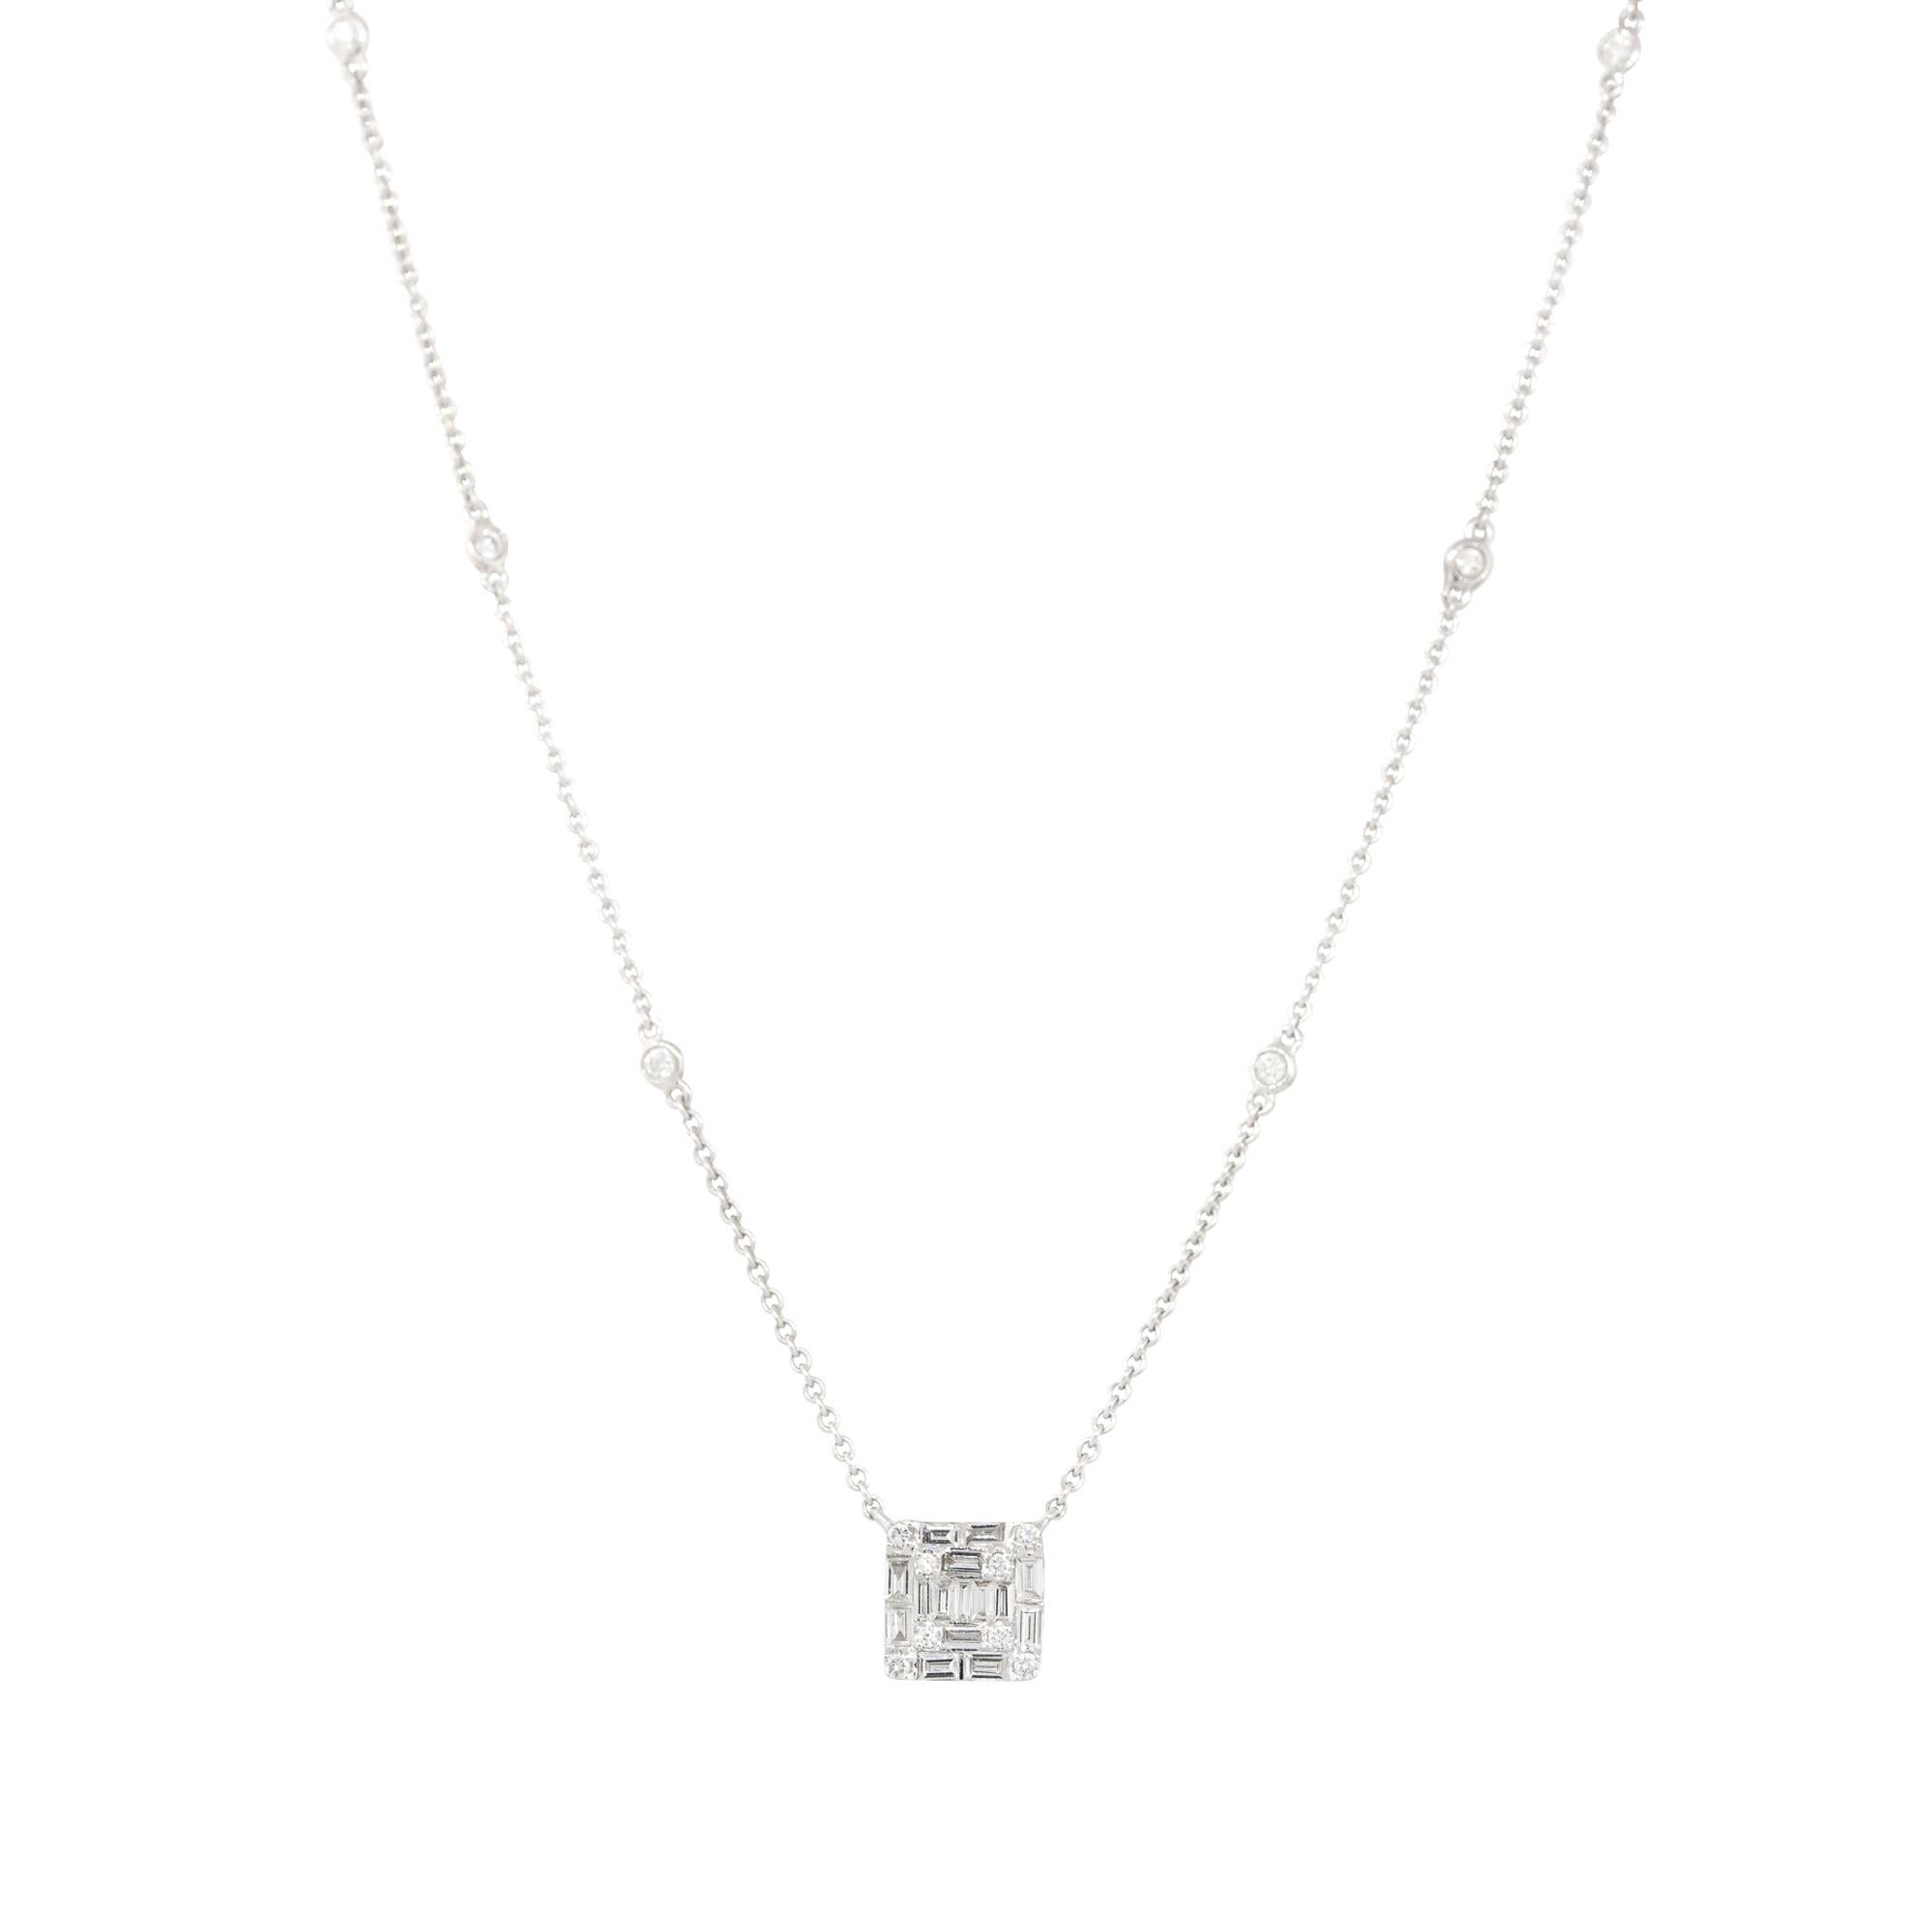 18k White Gold 0.64ctw Mosaic Diamond Station Necklace
Material: 18k White Gold
Diamond Details: Approximately 0.64ctw of Round Cut and Baguette Cut Diamonds
Total Weight: 3.8g (2.5dwt)
Additional Details: This item comes with a presentation